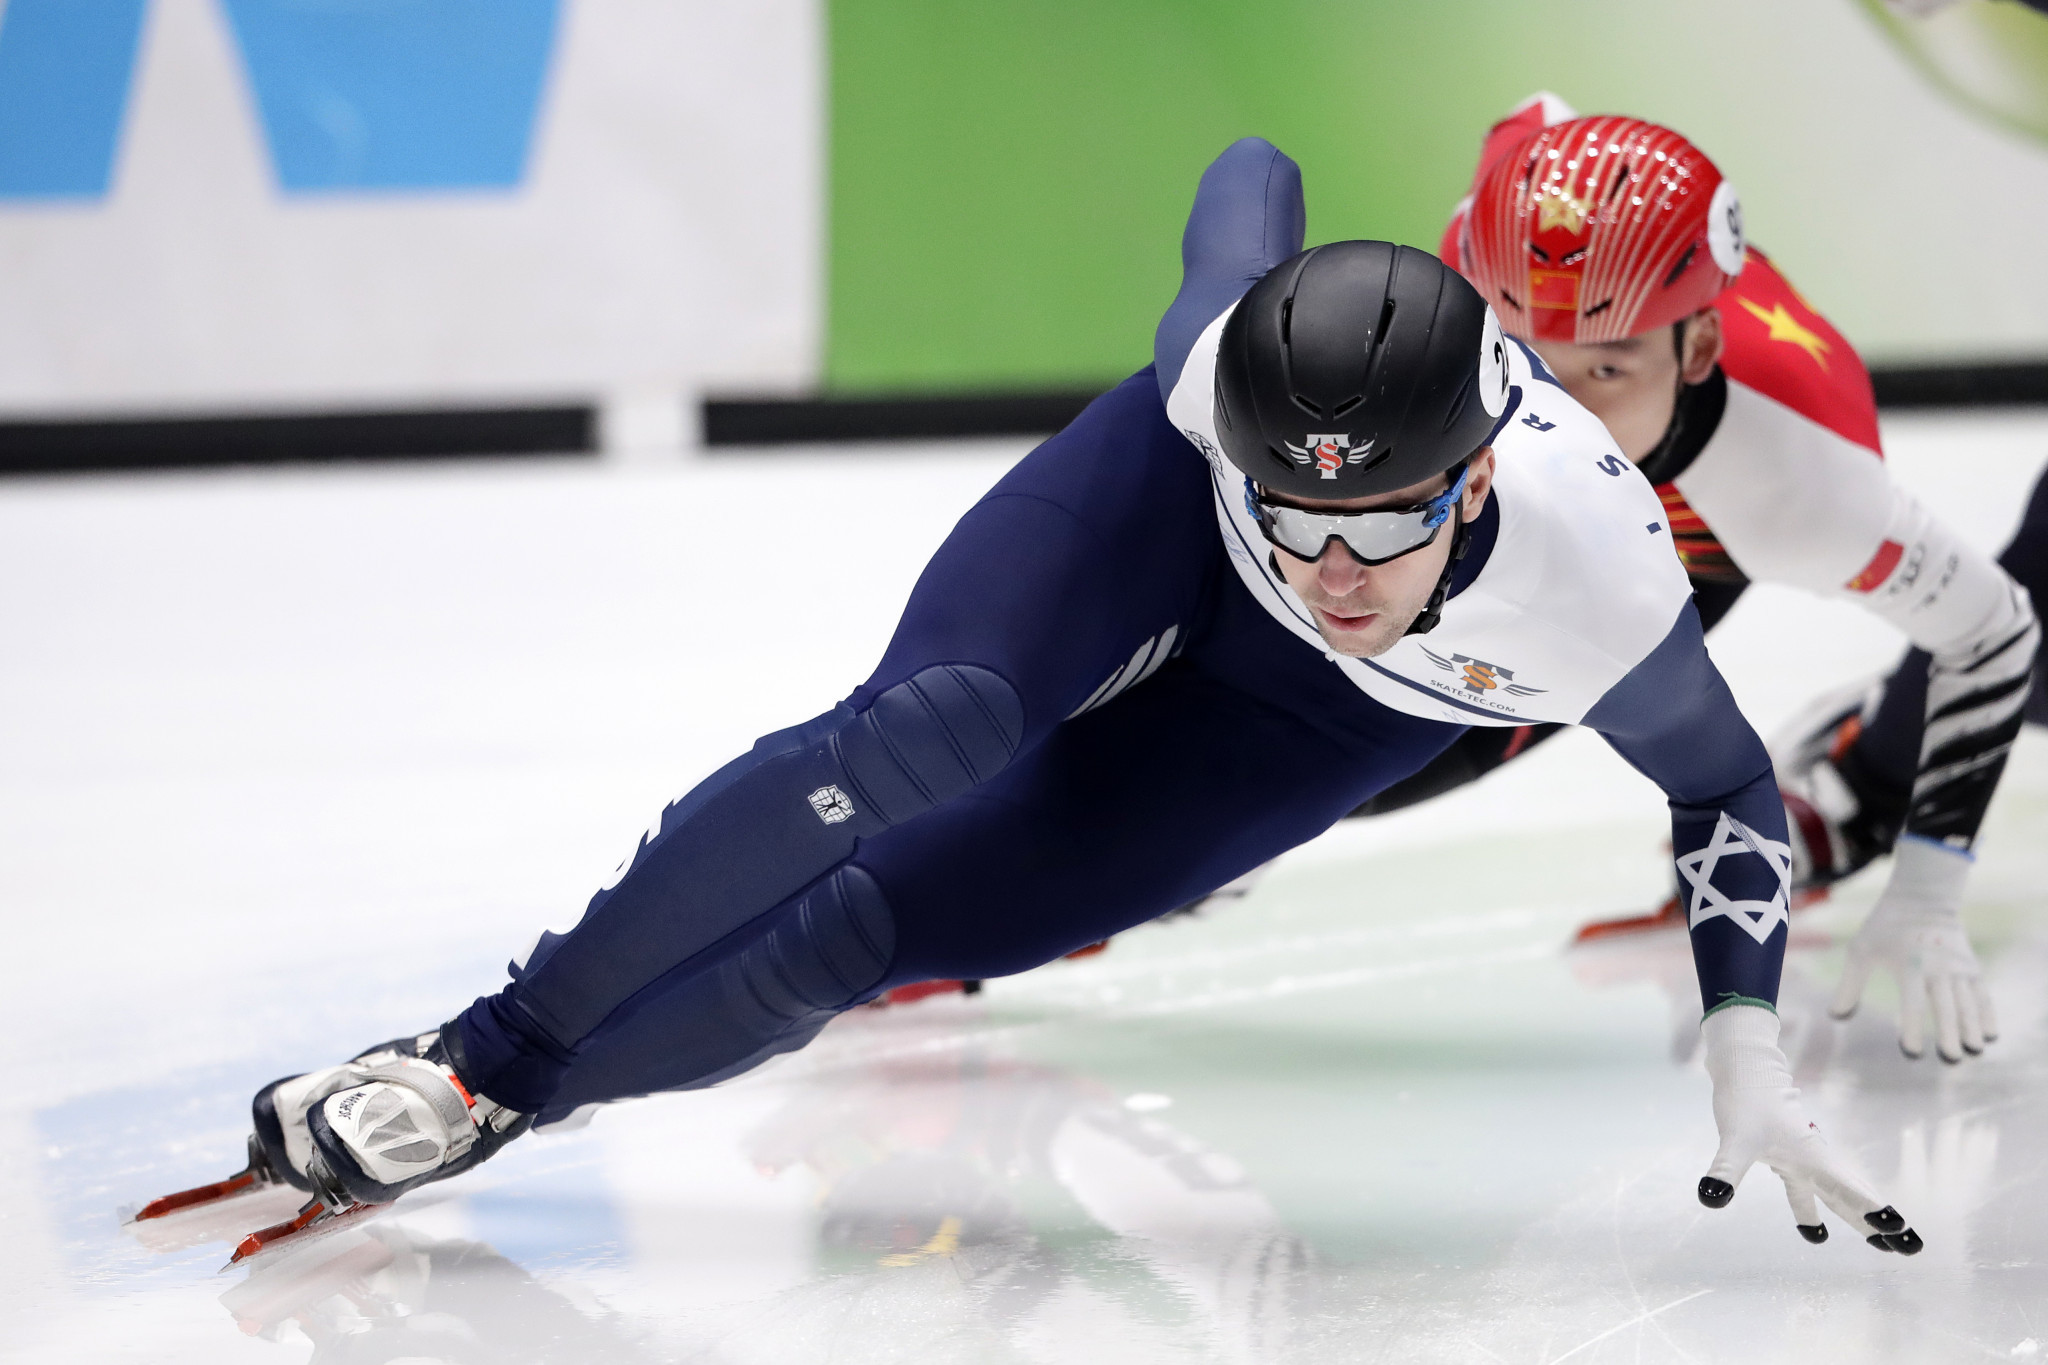 Vladislav Bykanov secured his place in the men's 1500m semi-finals at the ISU Short Track Speed Skating World Cup ©Getty Images